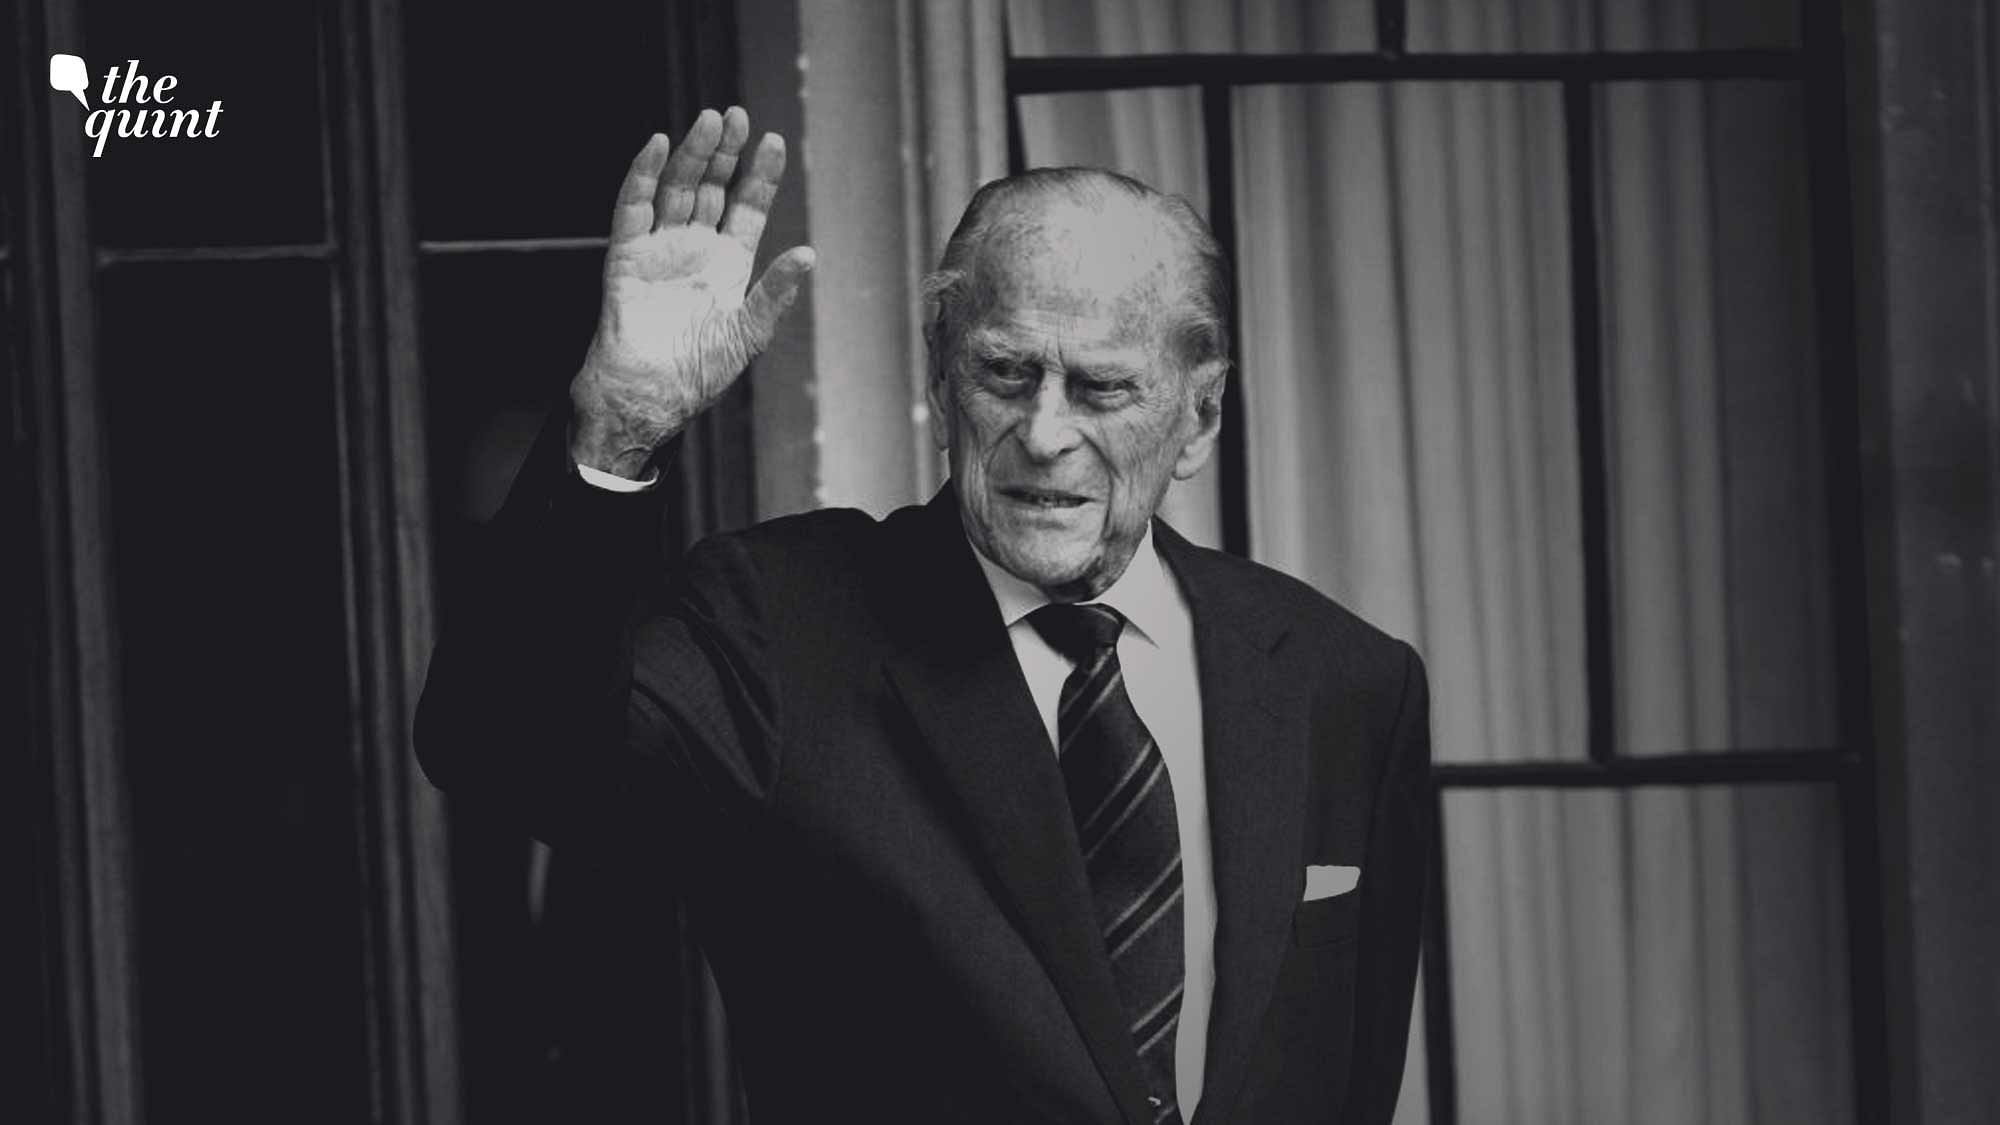 Queen Elizabeth II’s husband Prince Philip passed away at the age of 99, the Royal Family had announced on Friday, 9 April.